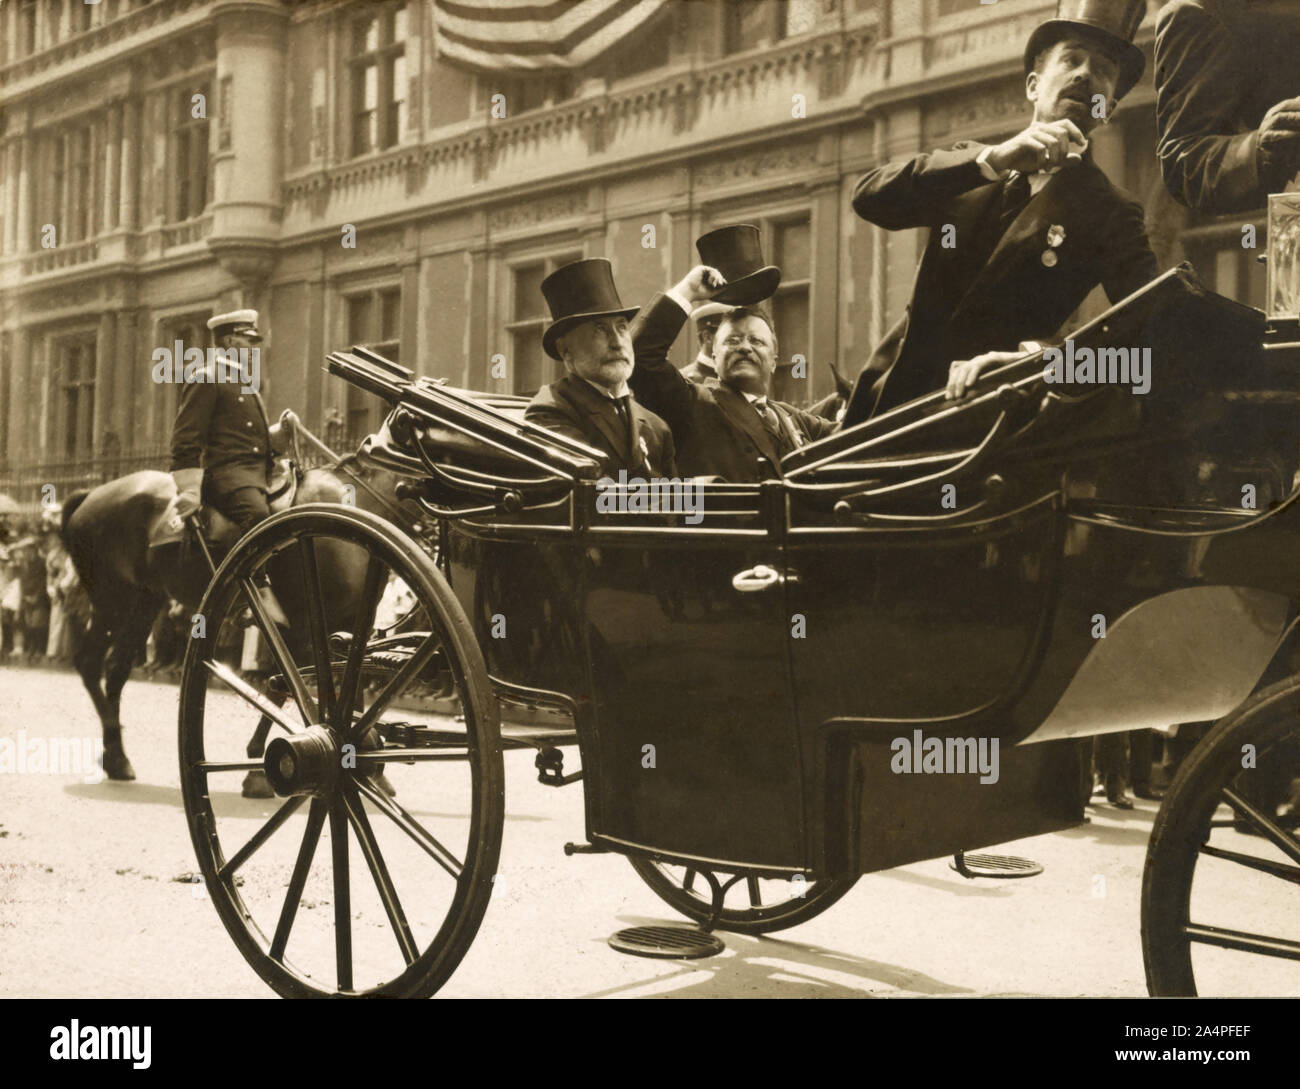 Theodore Roosevelt riding in open Carriage with New York City Mayor William Gaynor and Cornelius Vanderbilt during his Homecoming Reception after his trip Abroad, New York City, New York, USA, 1910 Stock Photo